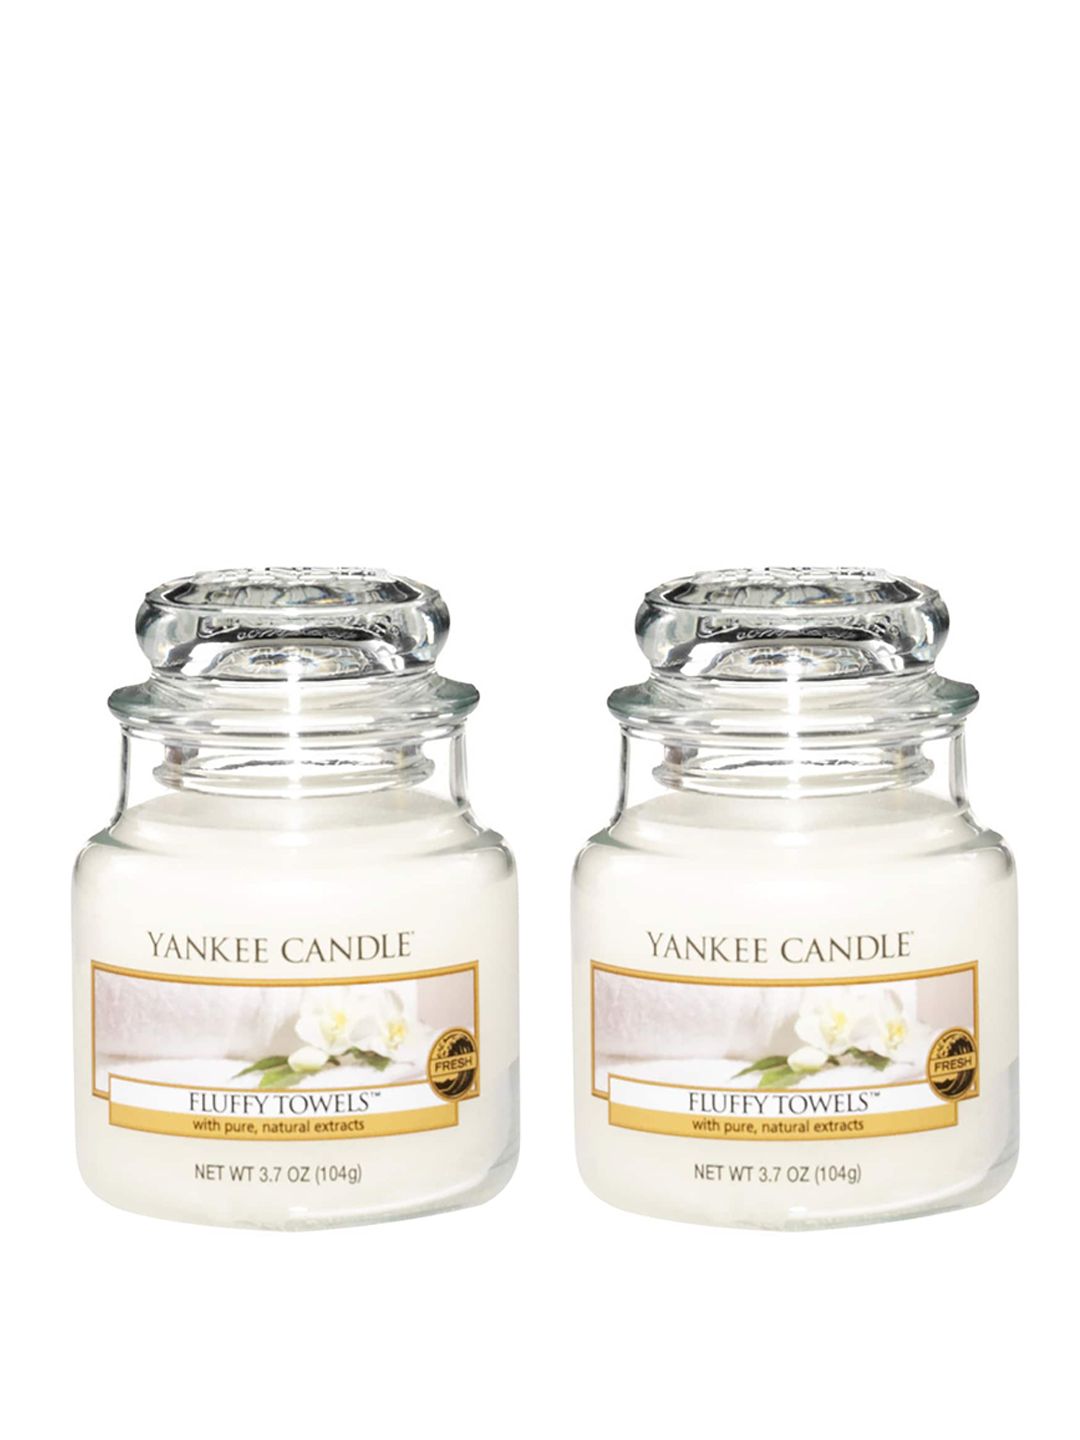 YANKEE CANDLE Set of 2 White Classic Small Jar Fluffy Towels Scented Candles Price in India